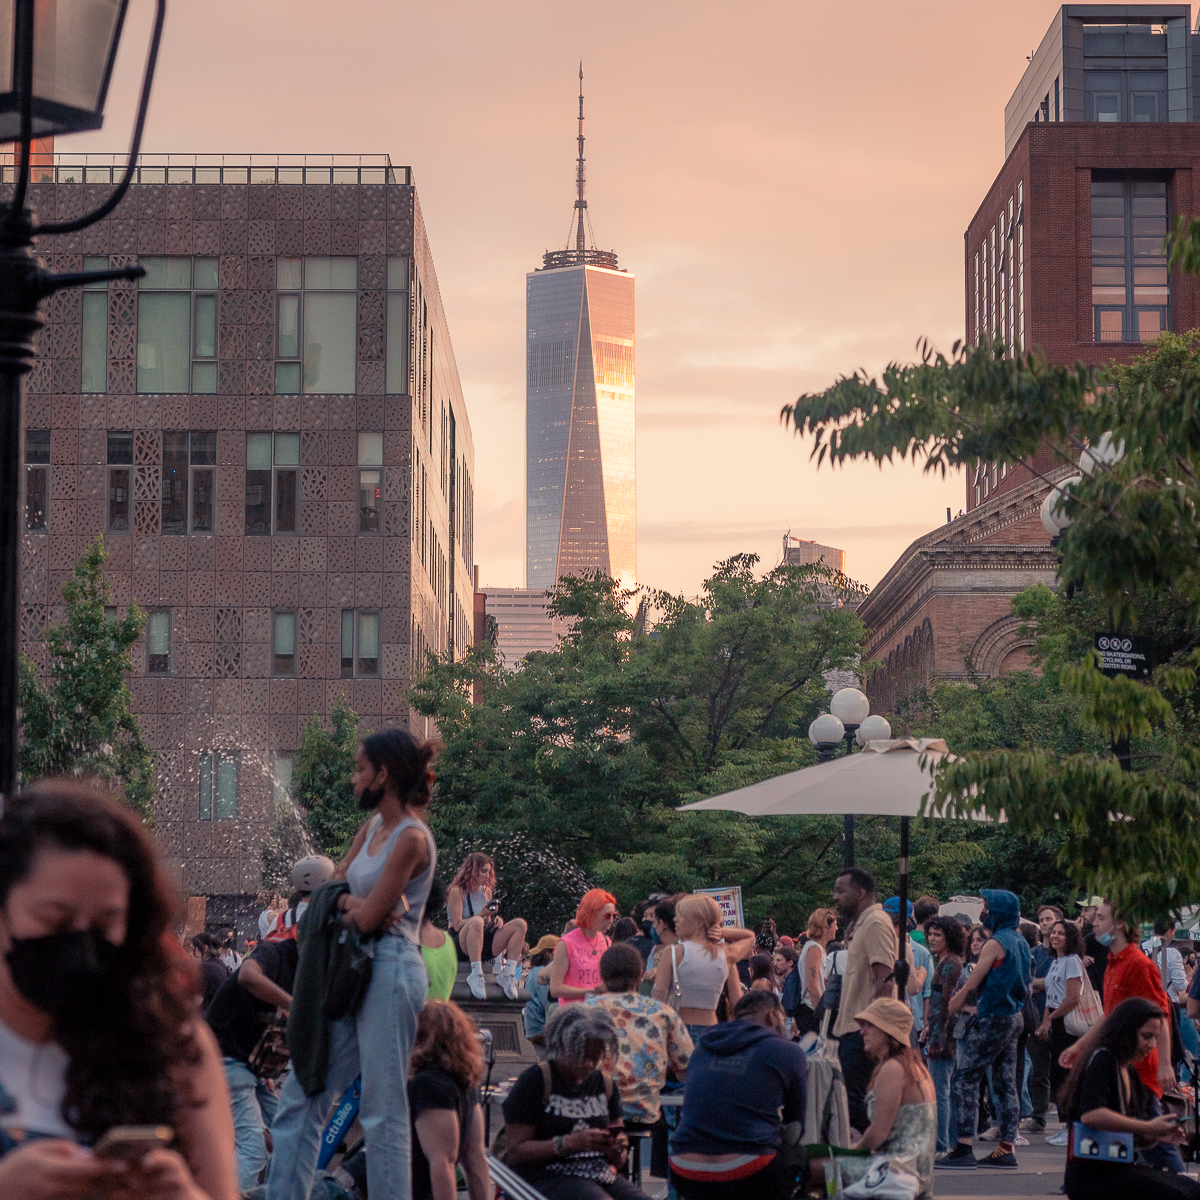 A group of people congregate at Washington Square Park during sunset with the Freedom Tower in the background.